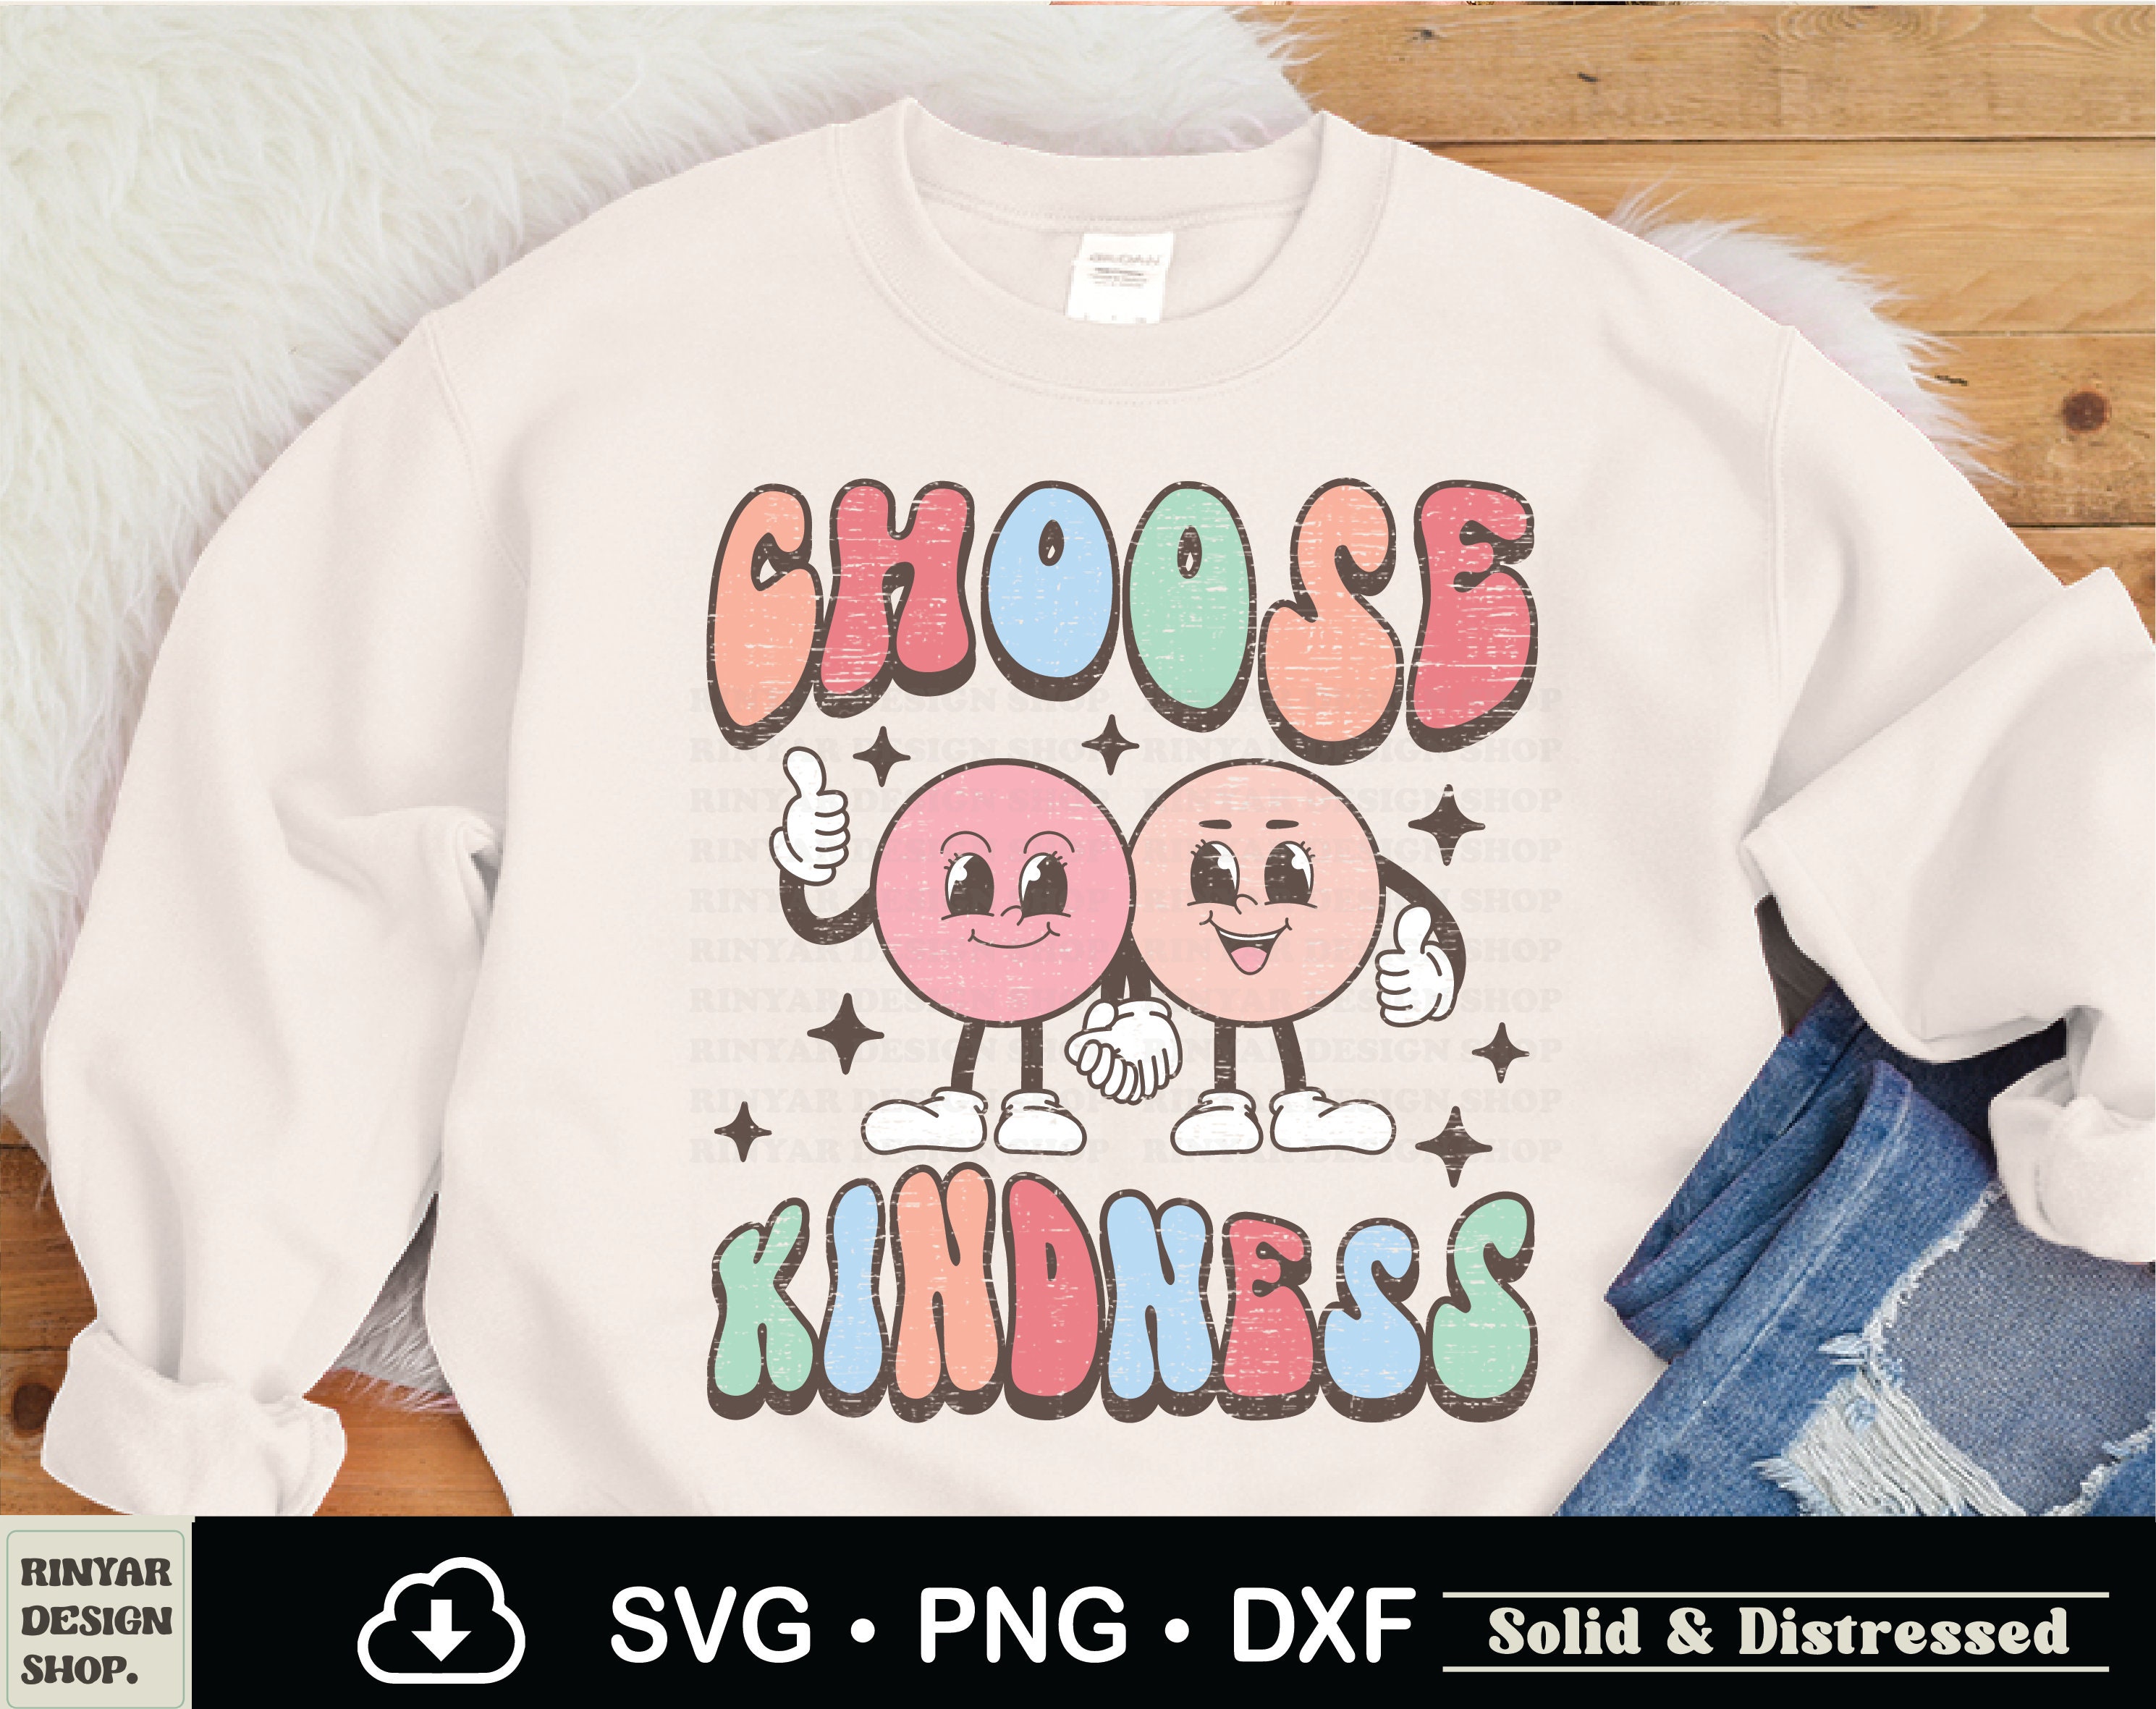 Choose Kindness Pink Smile Face Preppy Aesthetic Trendy T-Shirt